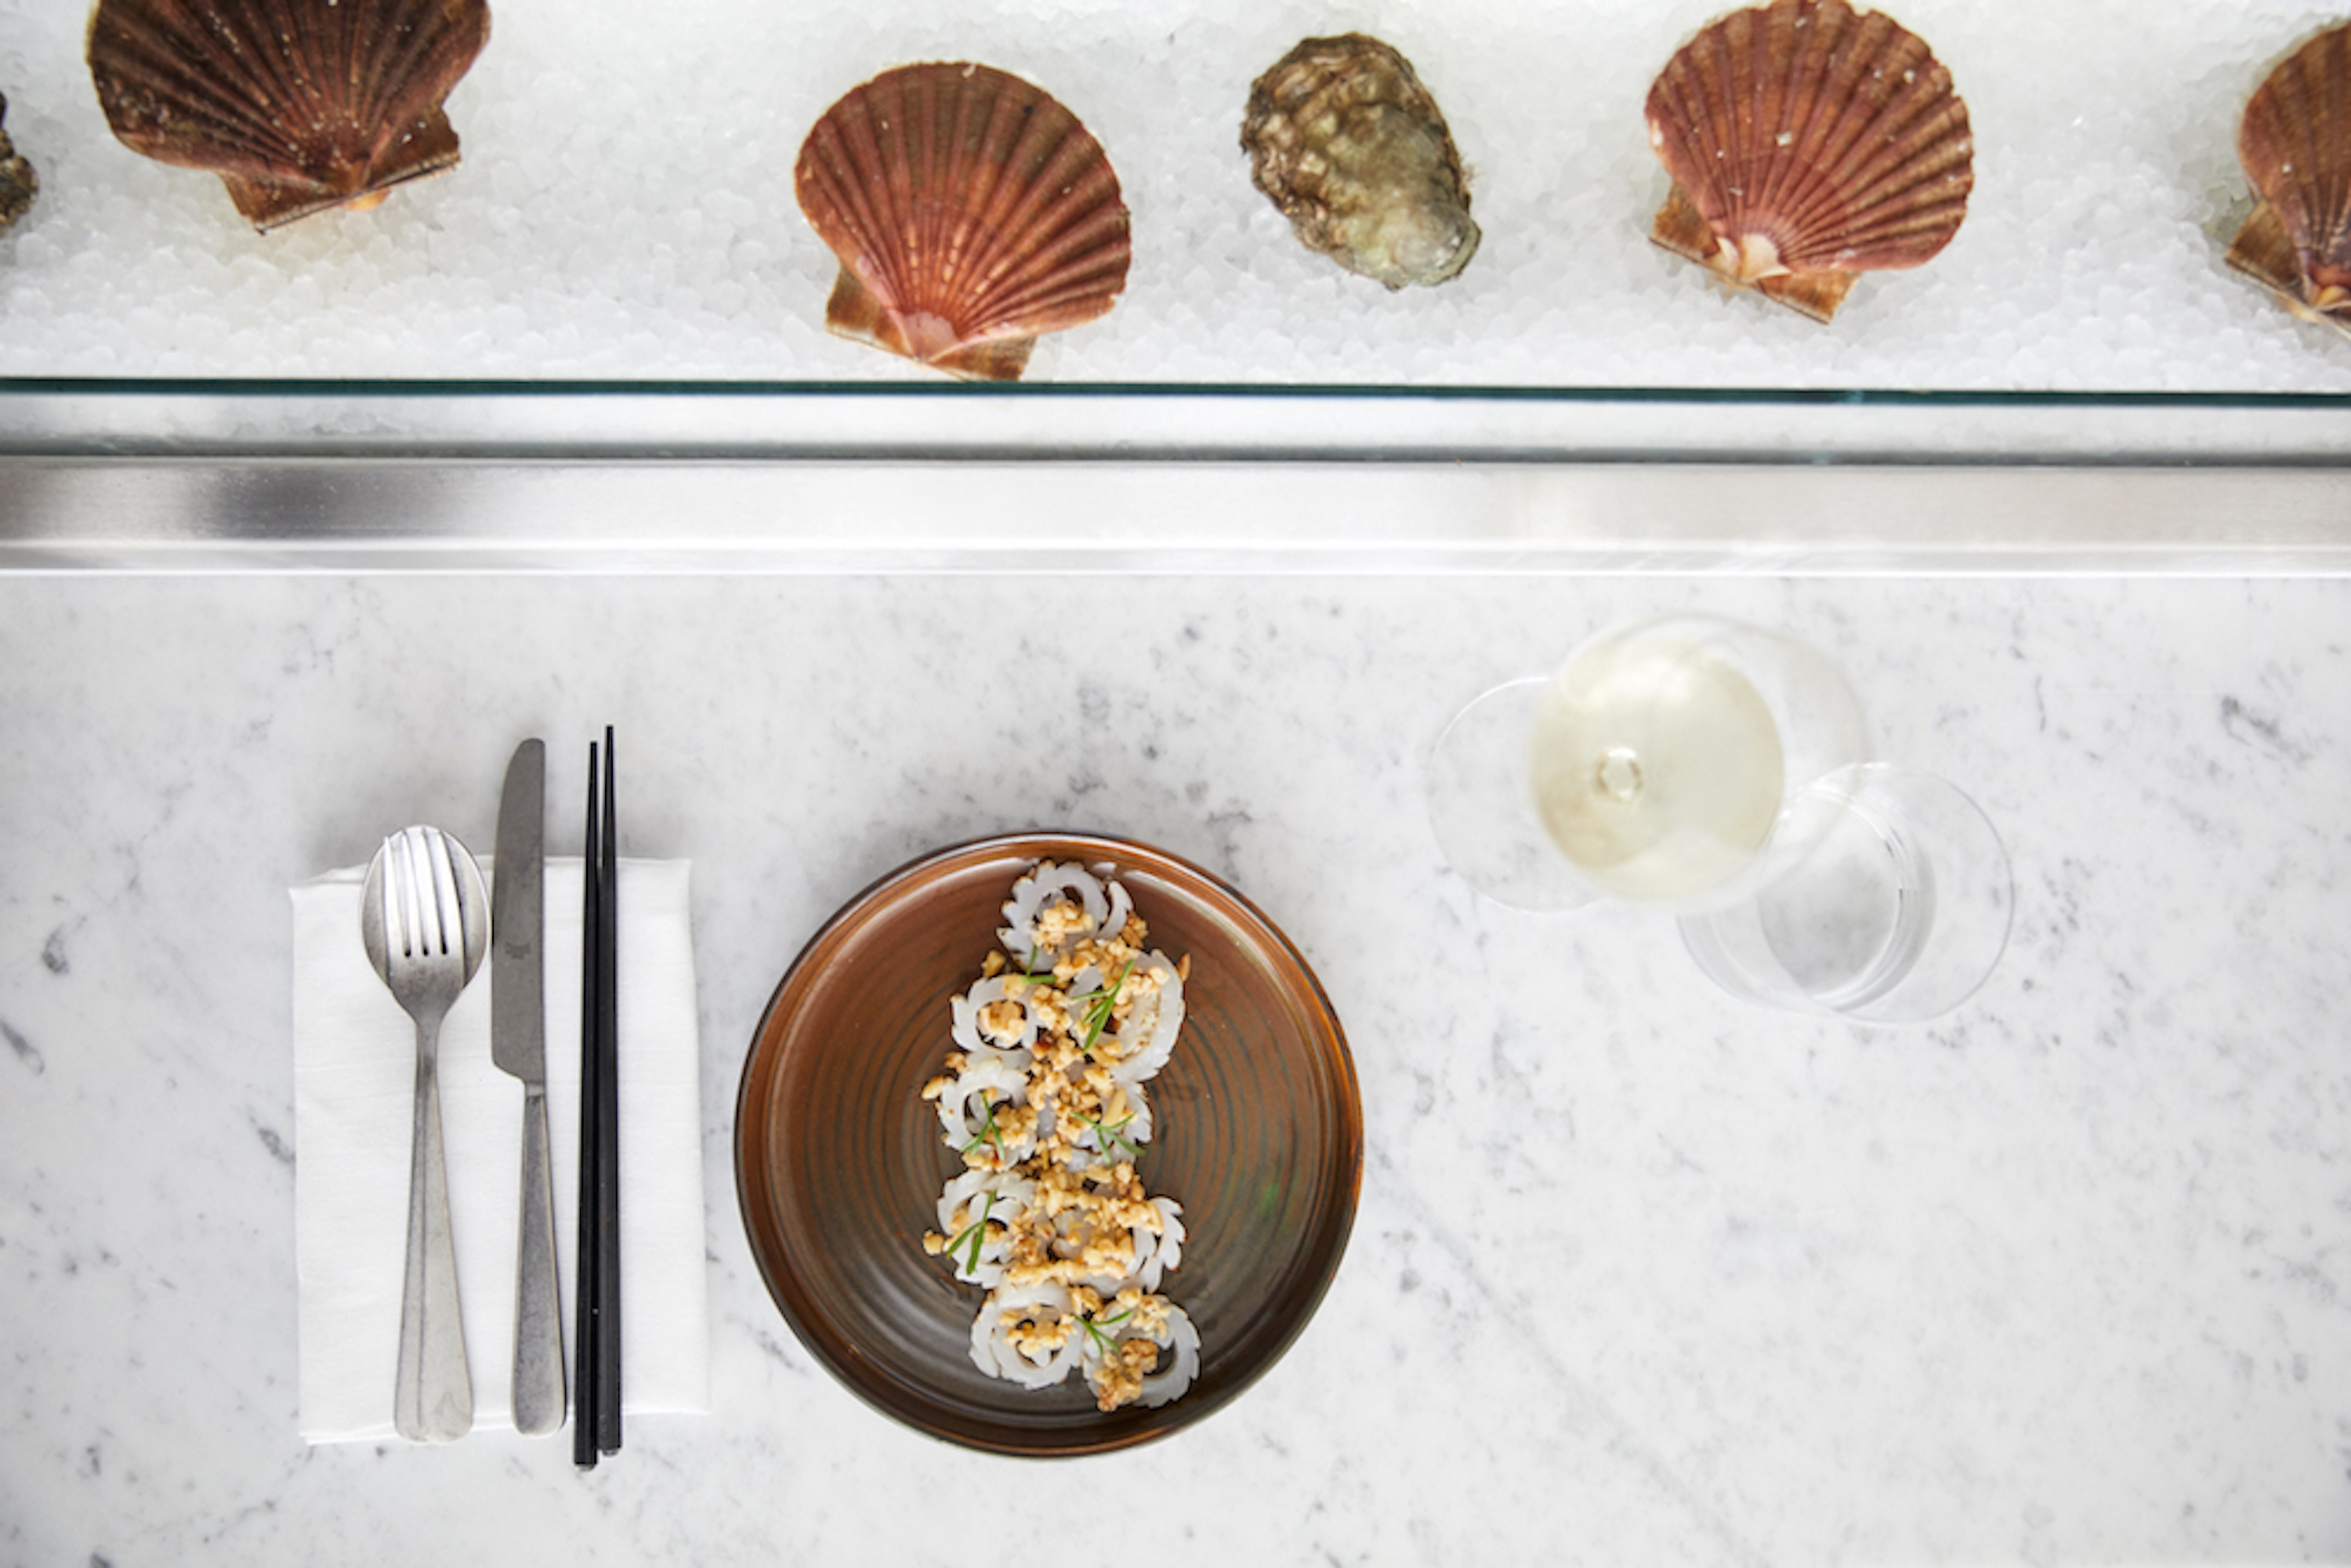 A fish dish with scallop shells and oysters on ice at London seafood restaurant The Sea The Sea